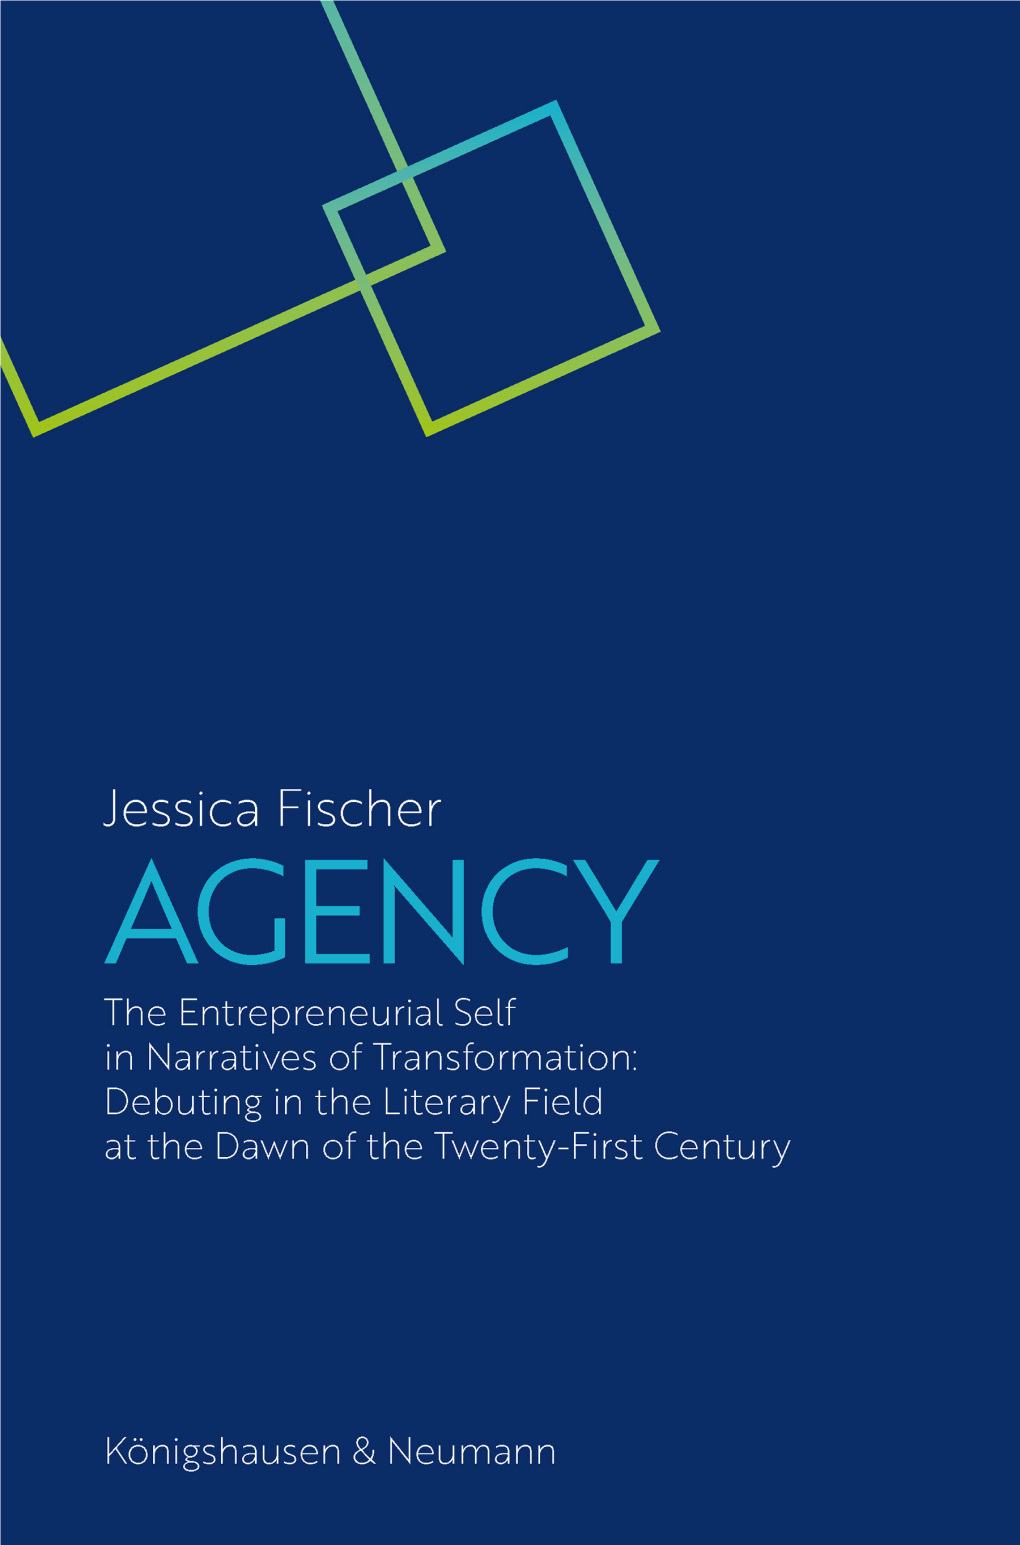 Agency: the Entrepreneurial Self in Narratives of Transformation